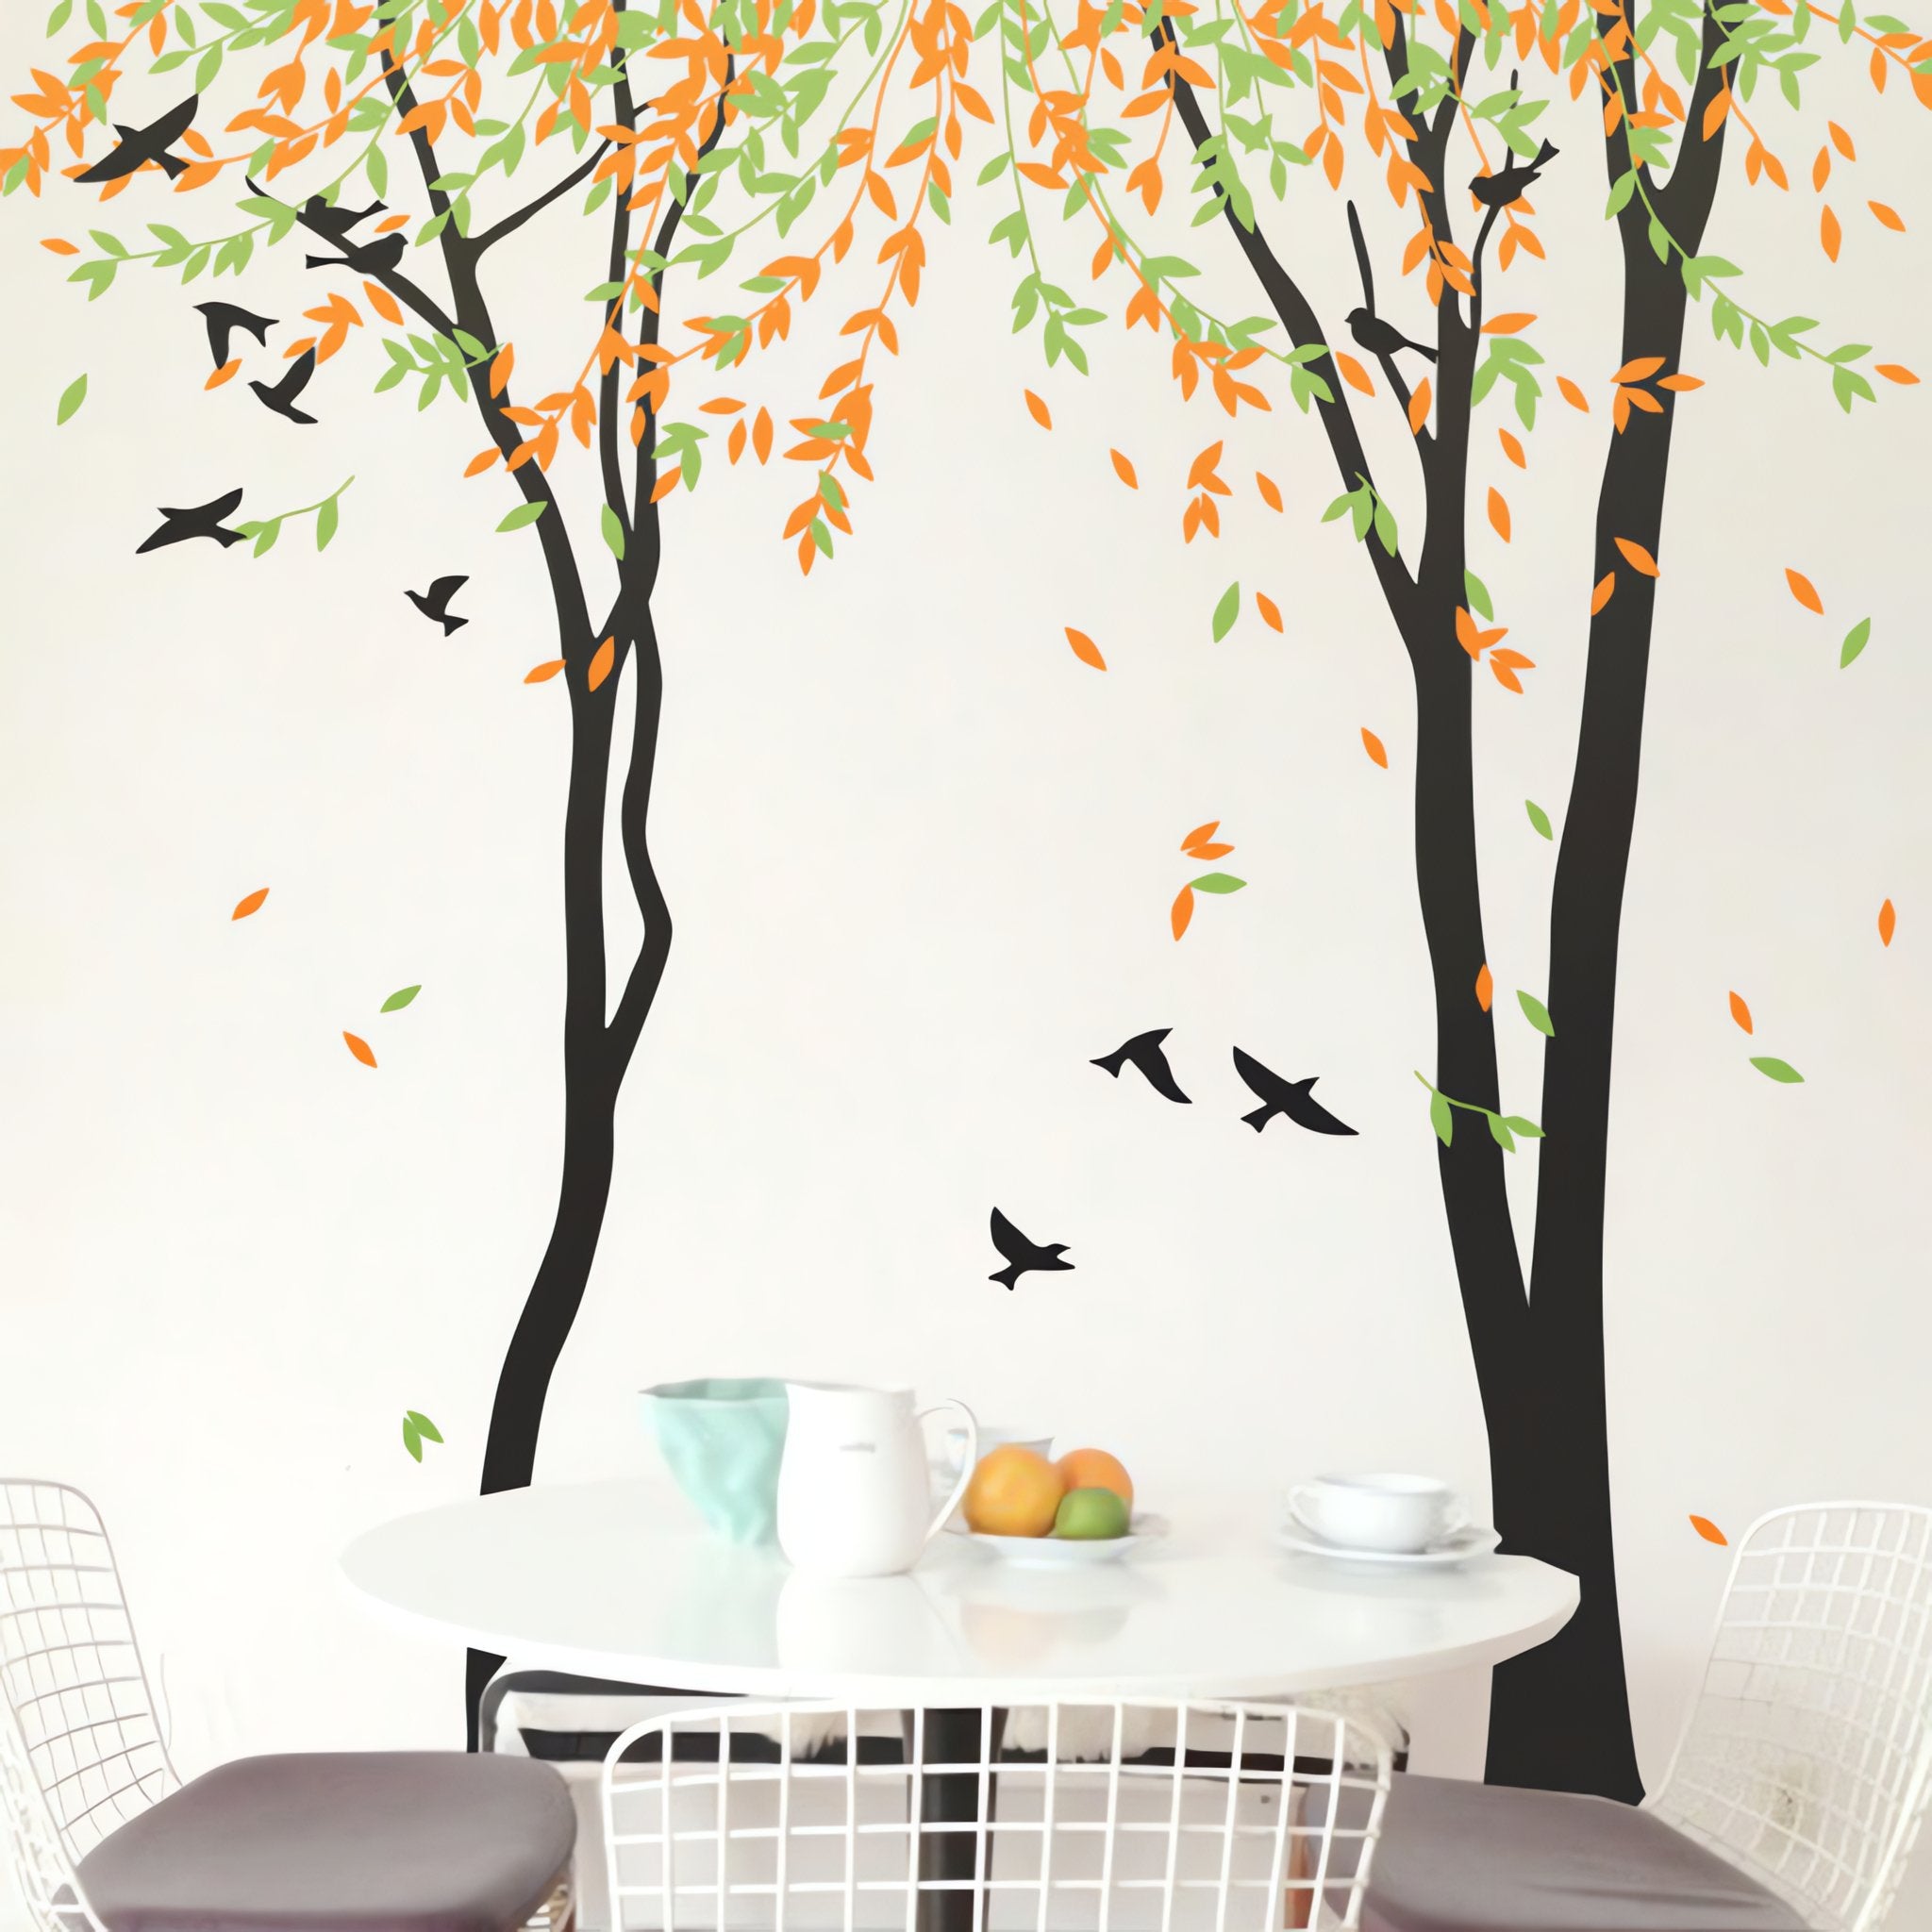 Tree wall sticker with birds and falling leaves in a room with a small dining table and 2 chairs.